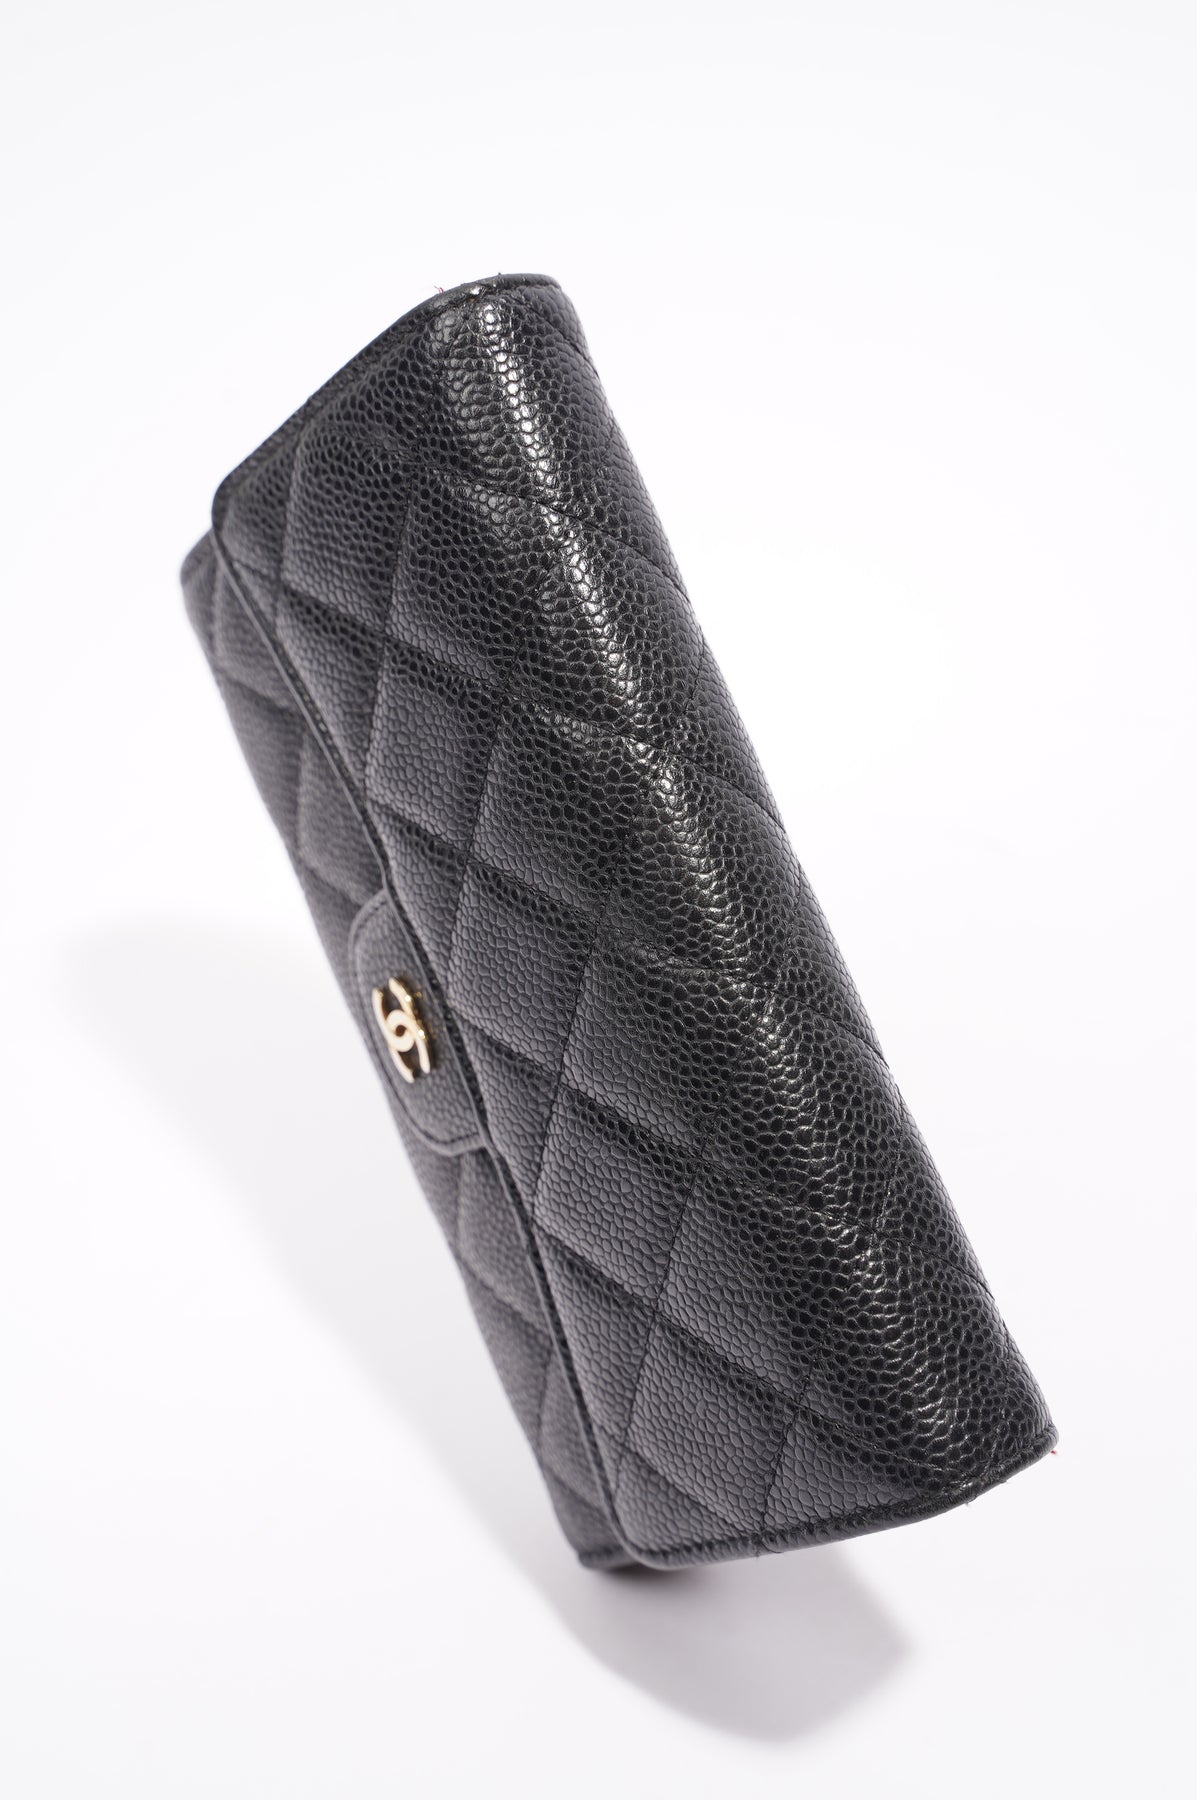 Chanel Classic Flap Wallet Quilted Long Black in Lambskin with